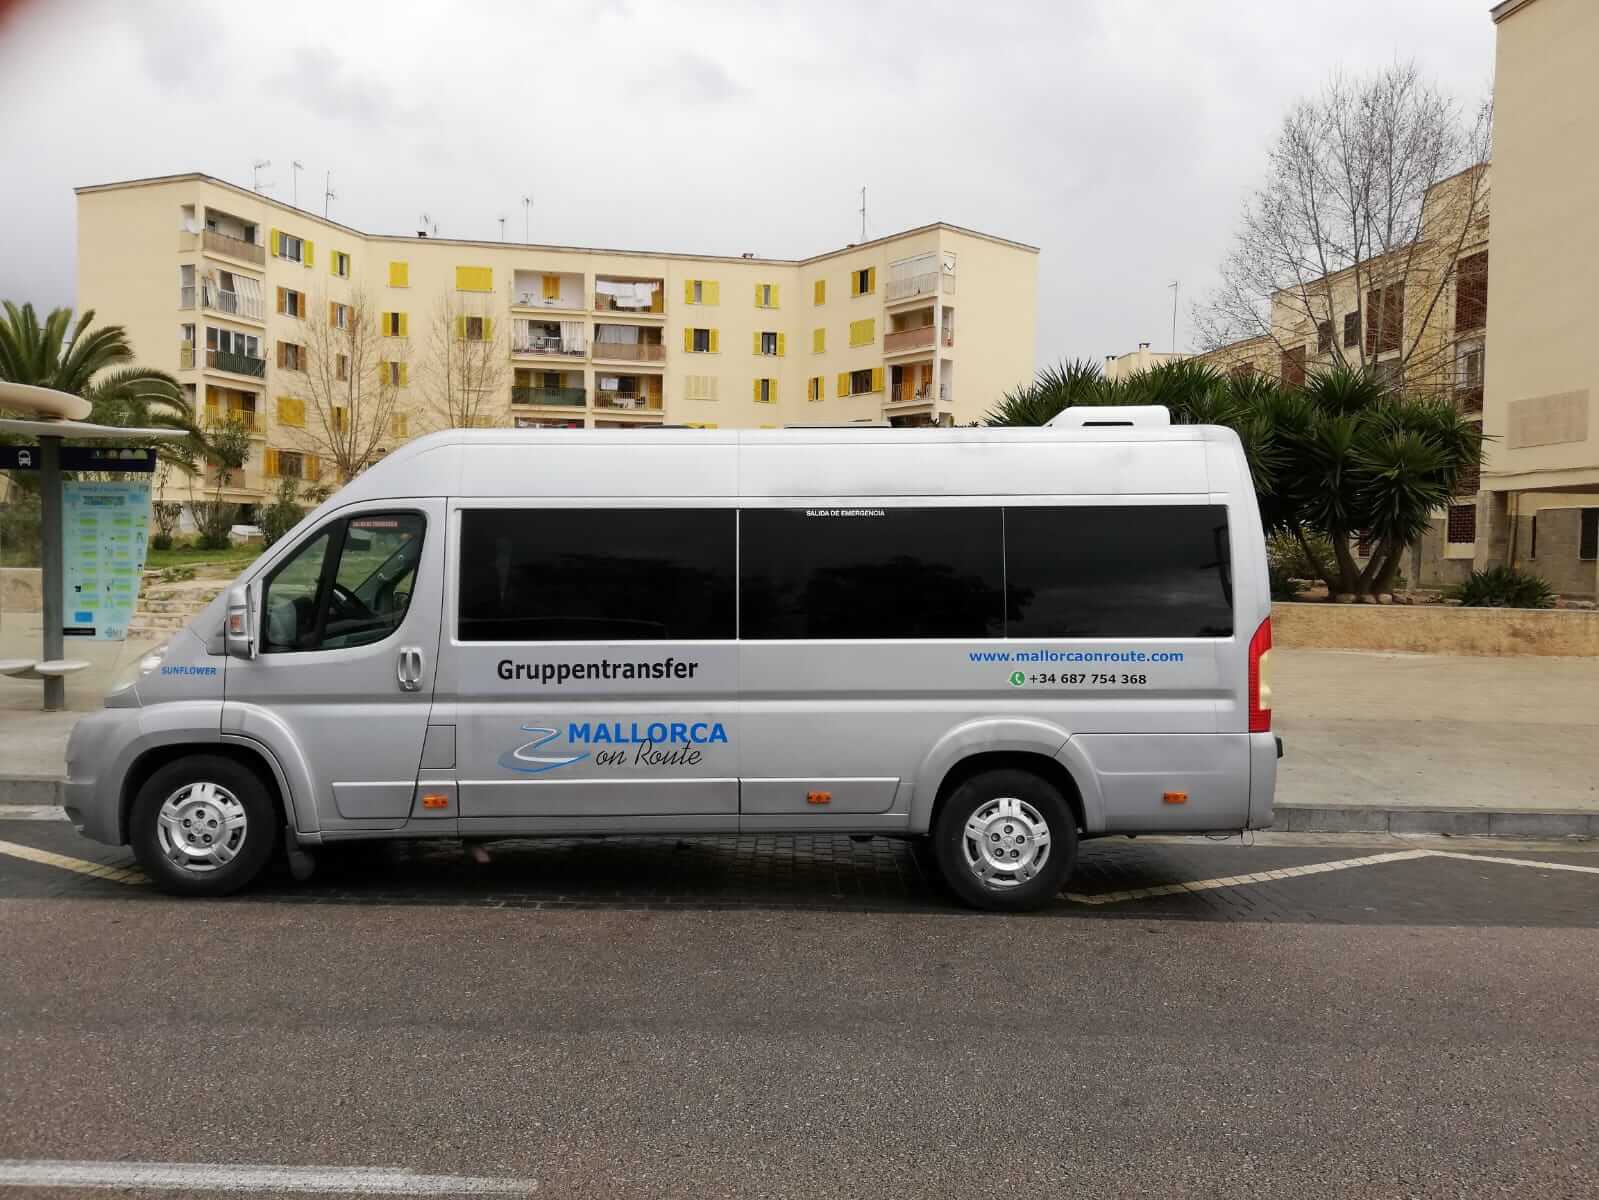 Hire a 13 seater Minibus  (Peugeot Boxer 2008) from Mallorca on Route Bus Transfer S.L in Llucmajor 